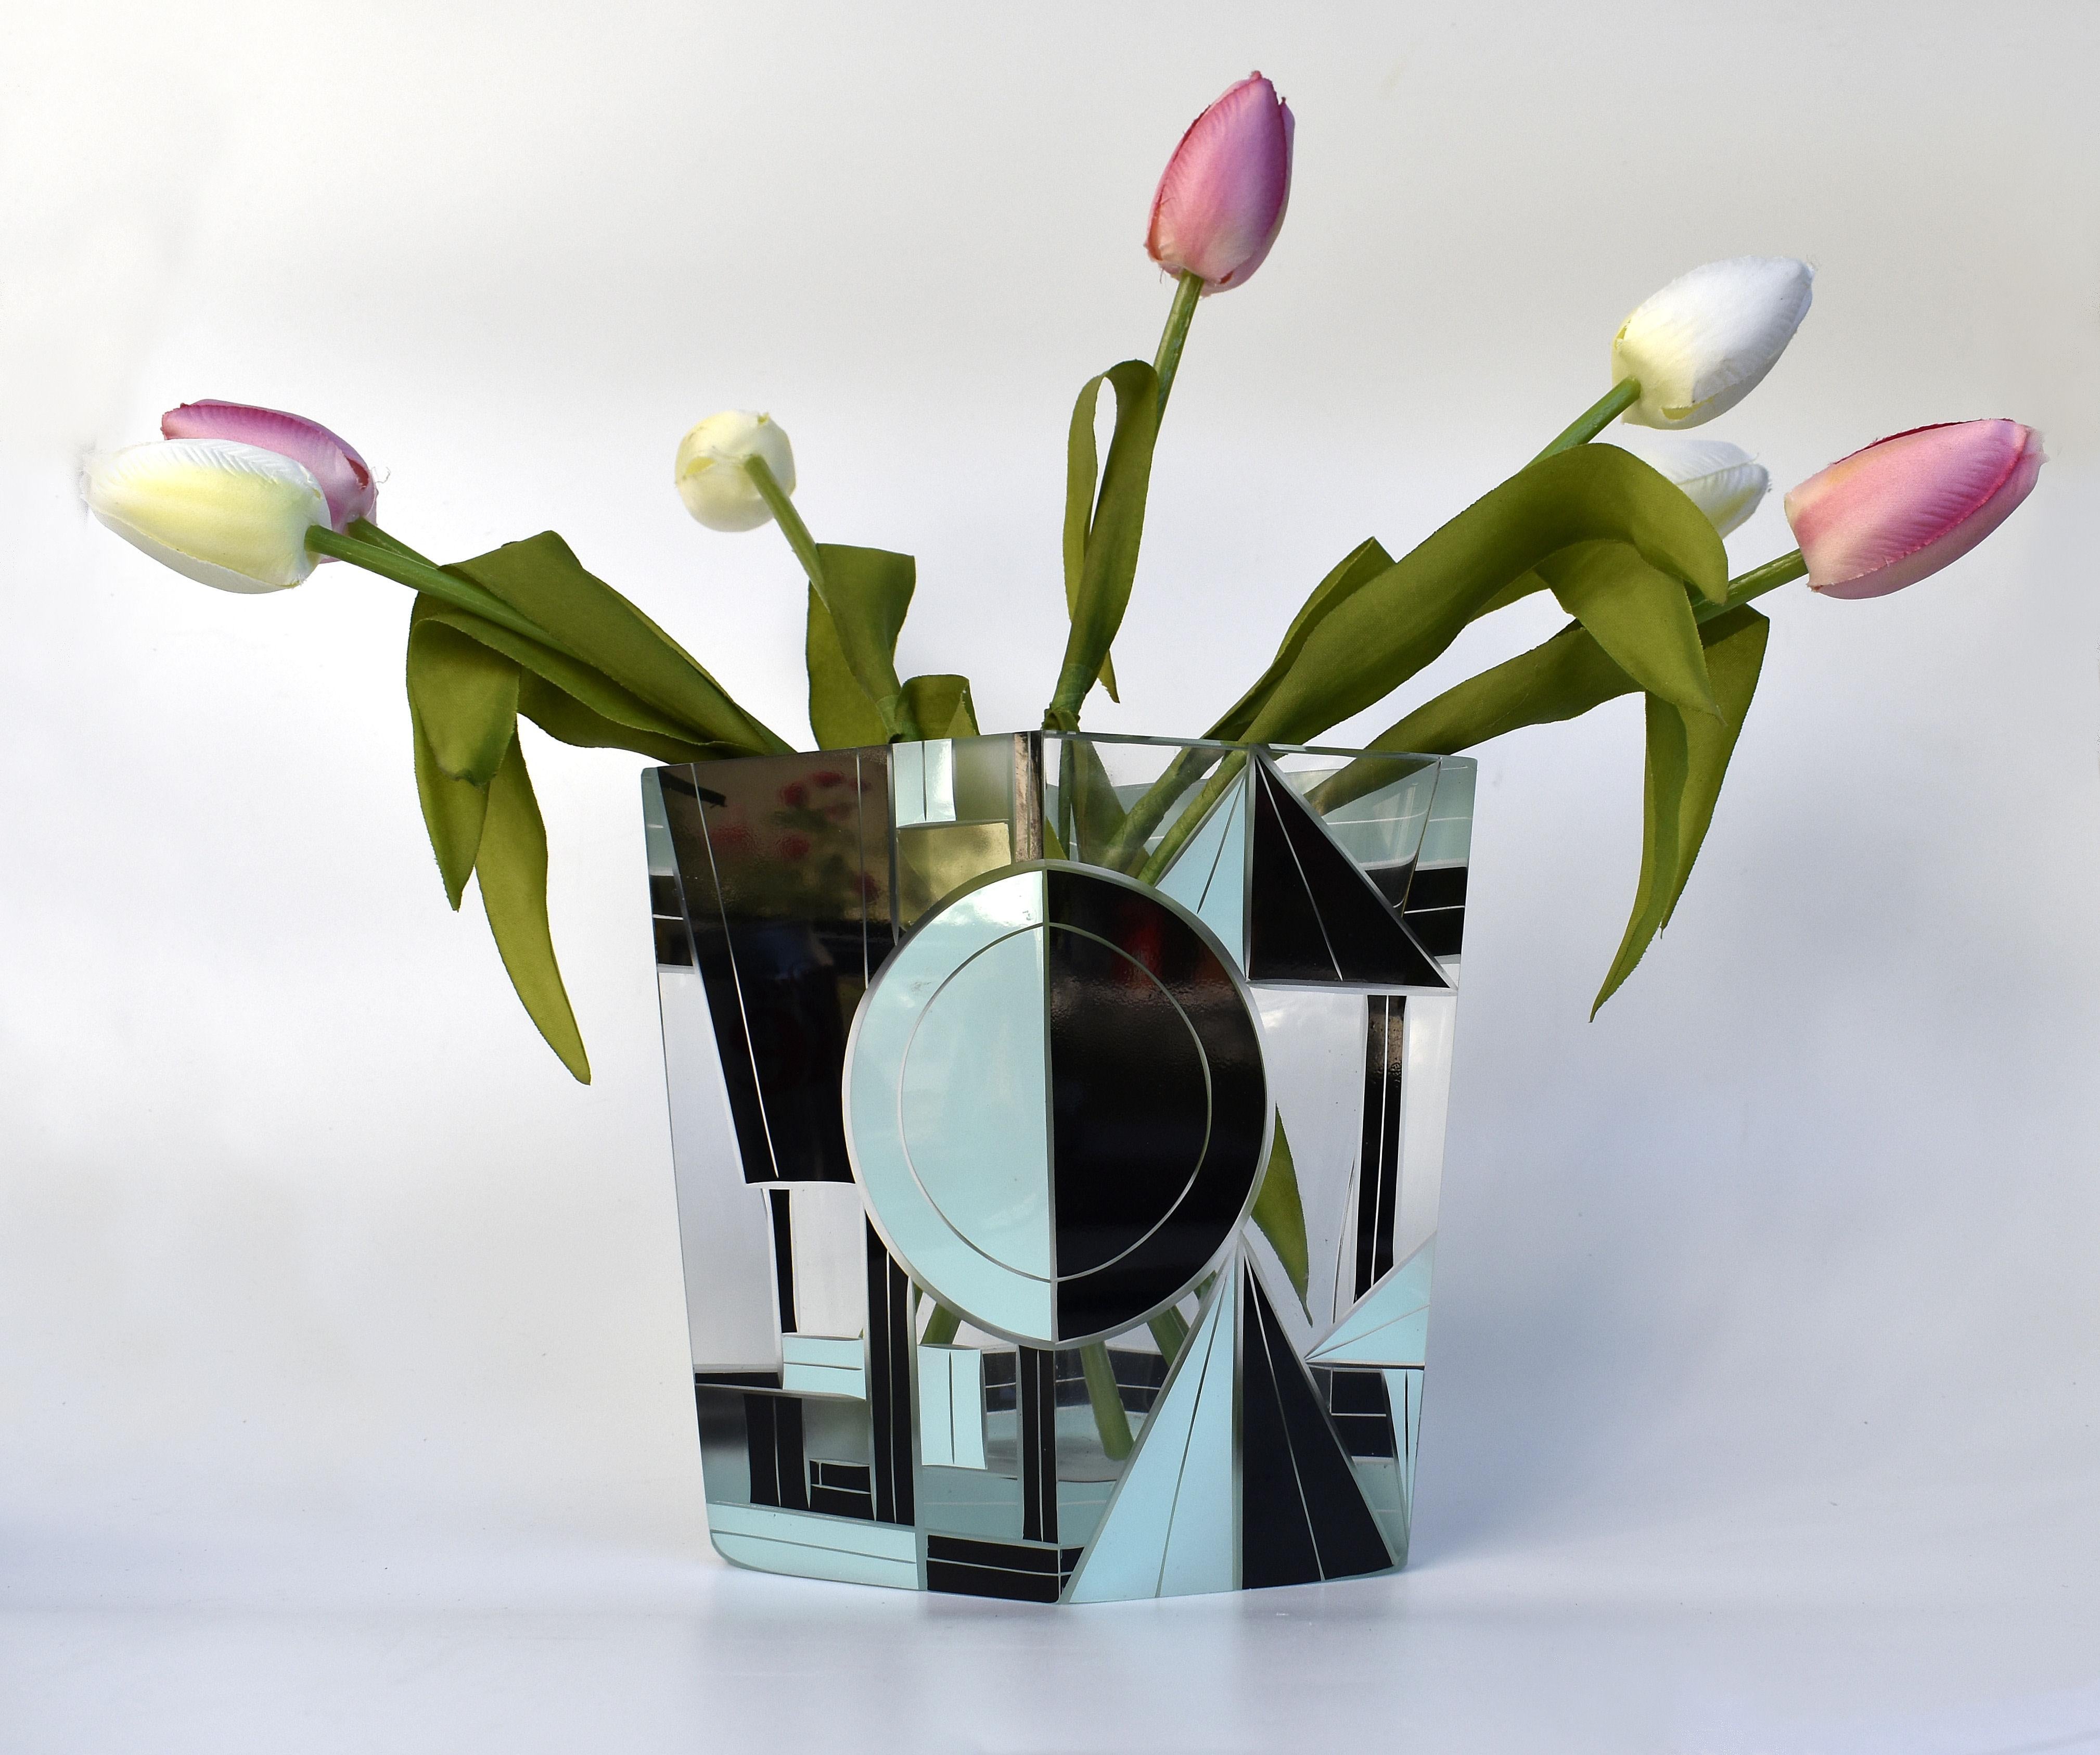 An exceptional 1930's Art Deco glass vase possibly by Karl Palda, originating from the Czech Republic and what a gem it is, It really does have an impact, being strongly decorated with two tone geometric decoration in Grey and black. Heavy in weight